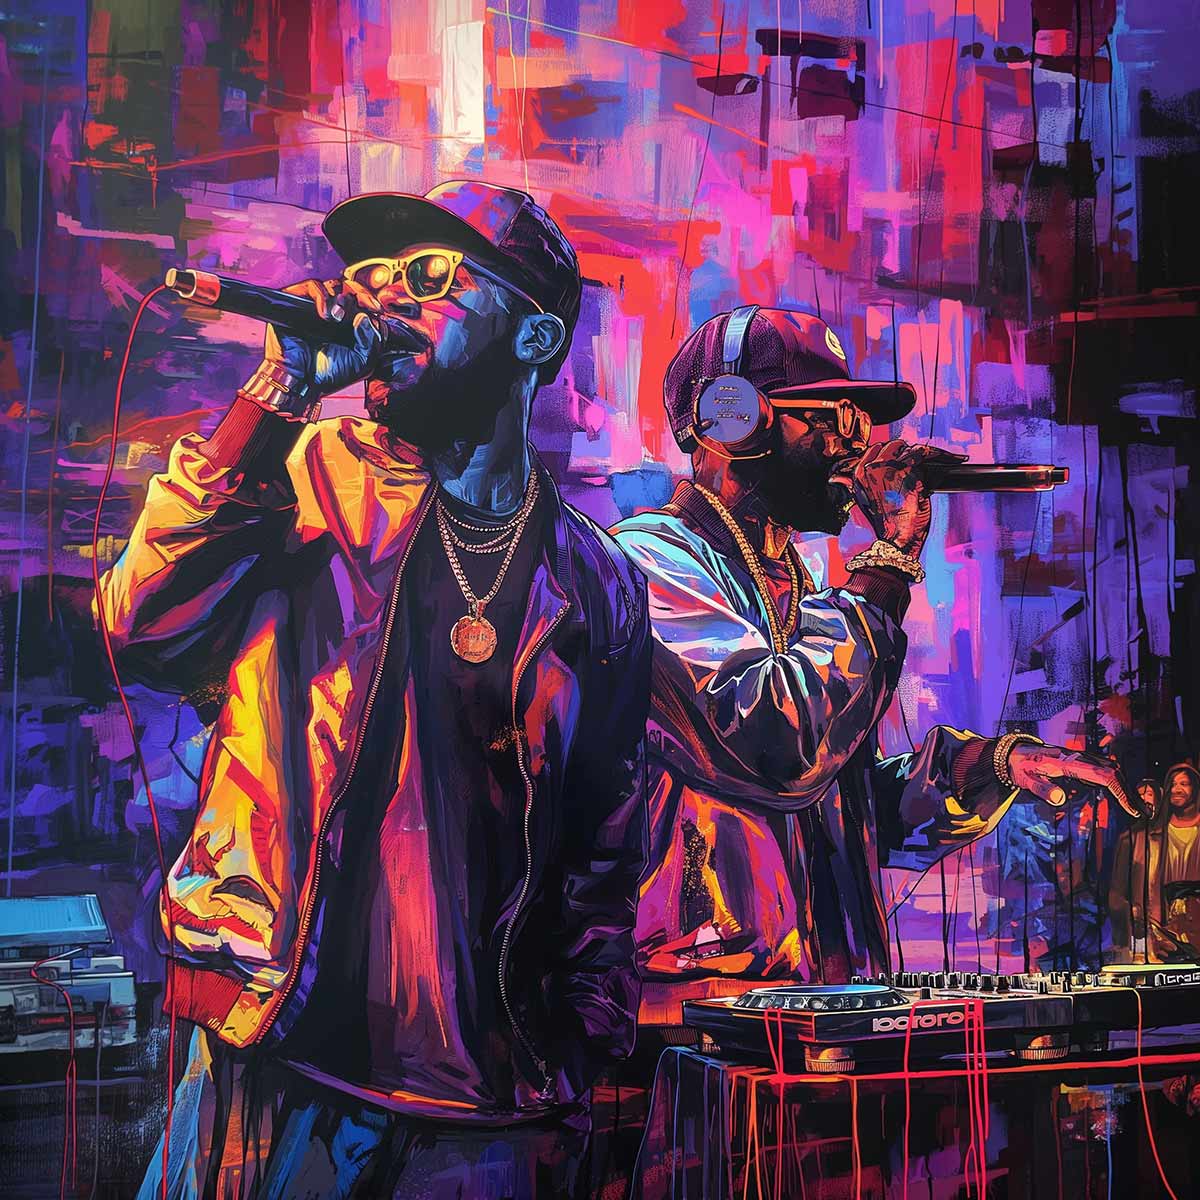 An AI-generated image depicting a rapper and DJ performing.